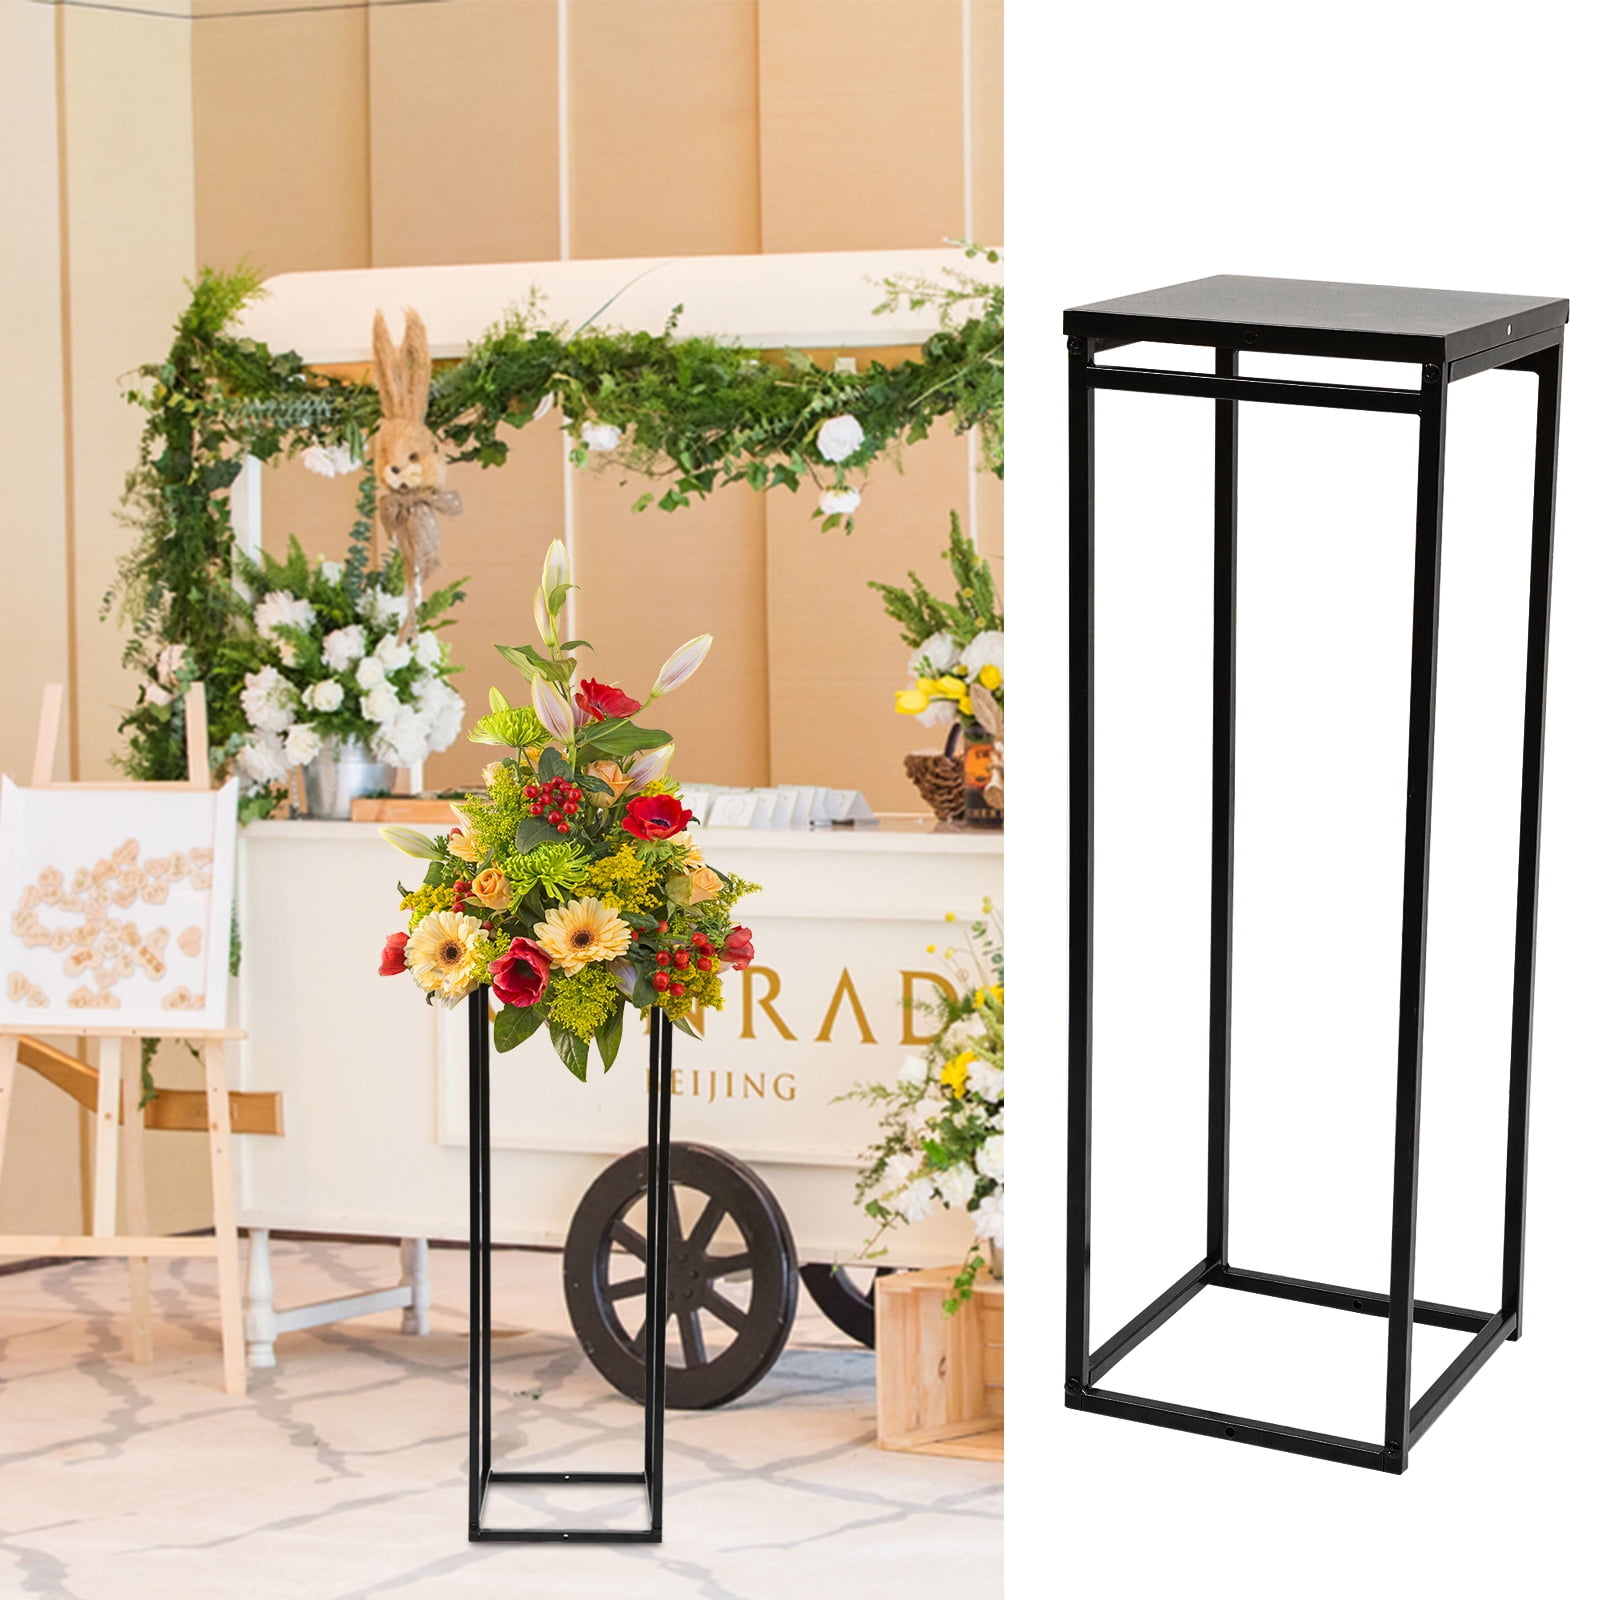 Anqidi Large Poster Stand Metal Wedding Decor Welcome Sign Rack